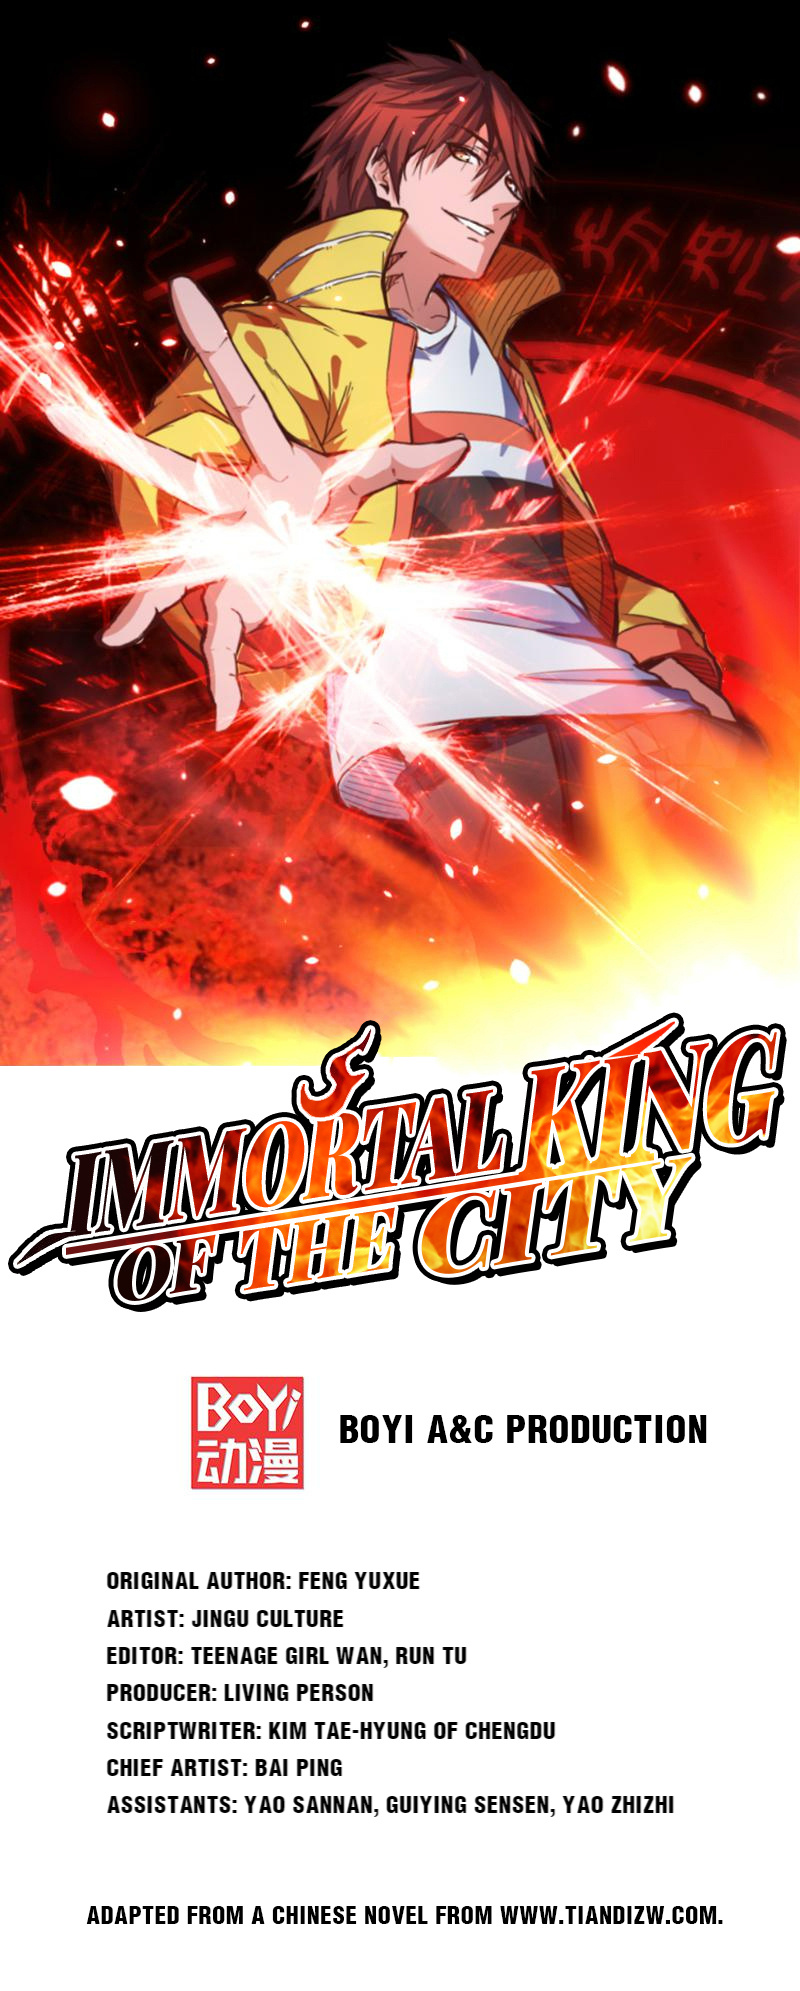 Immortal King of the City 14